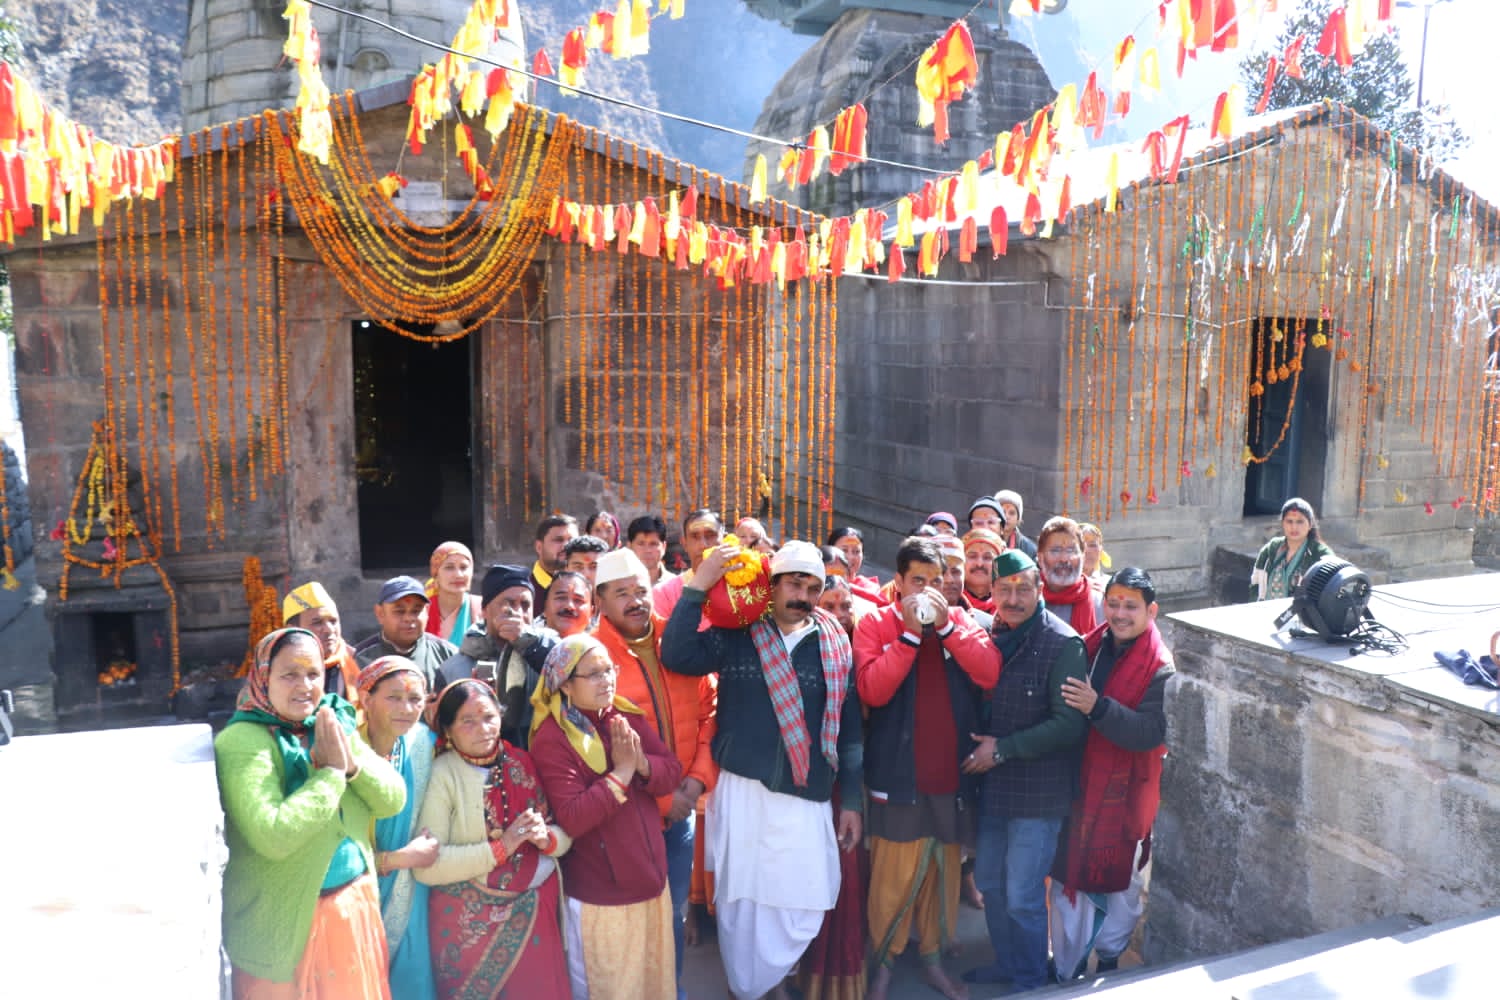 Basant Panchami date of opening of doors of Shri Badrinath Dham will be decided on 14th February.